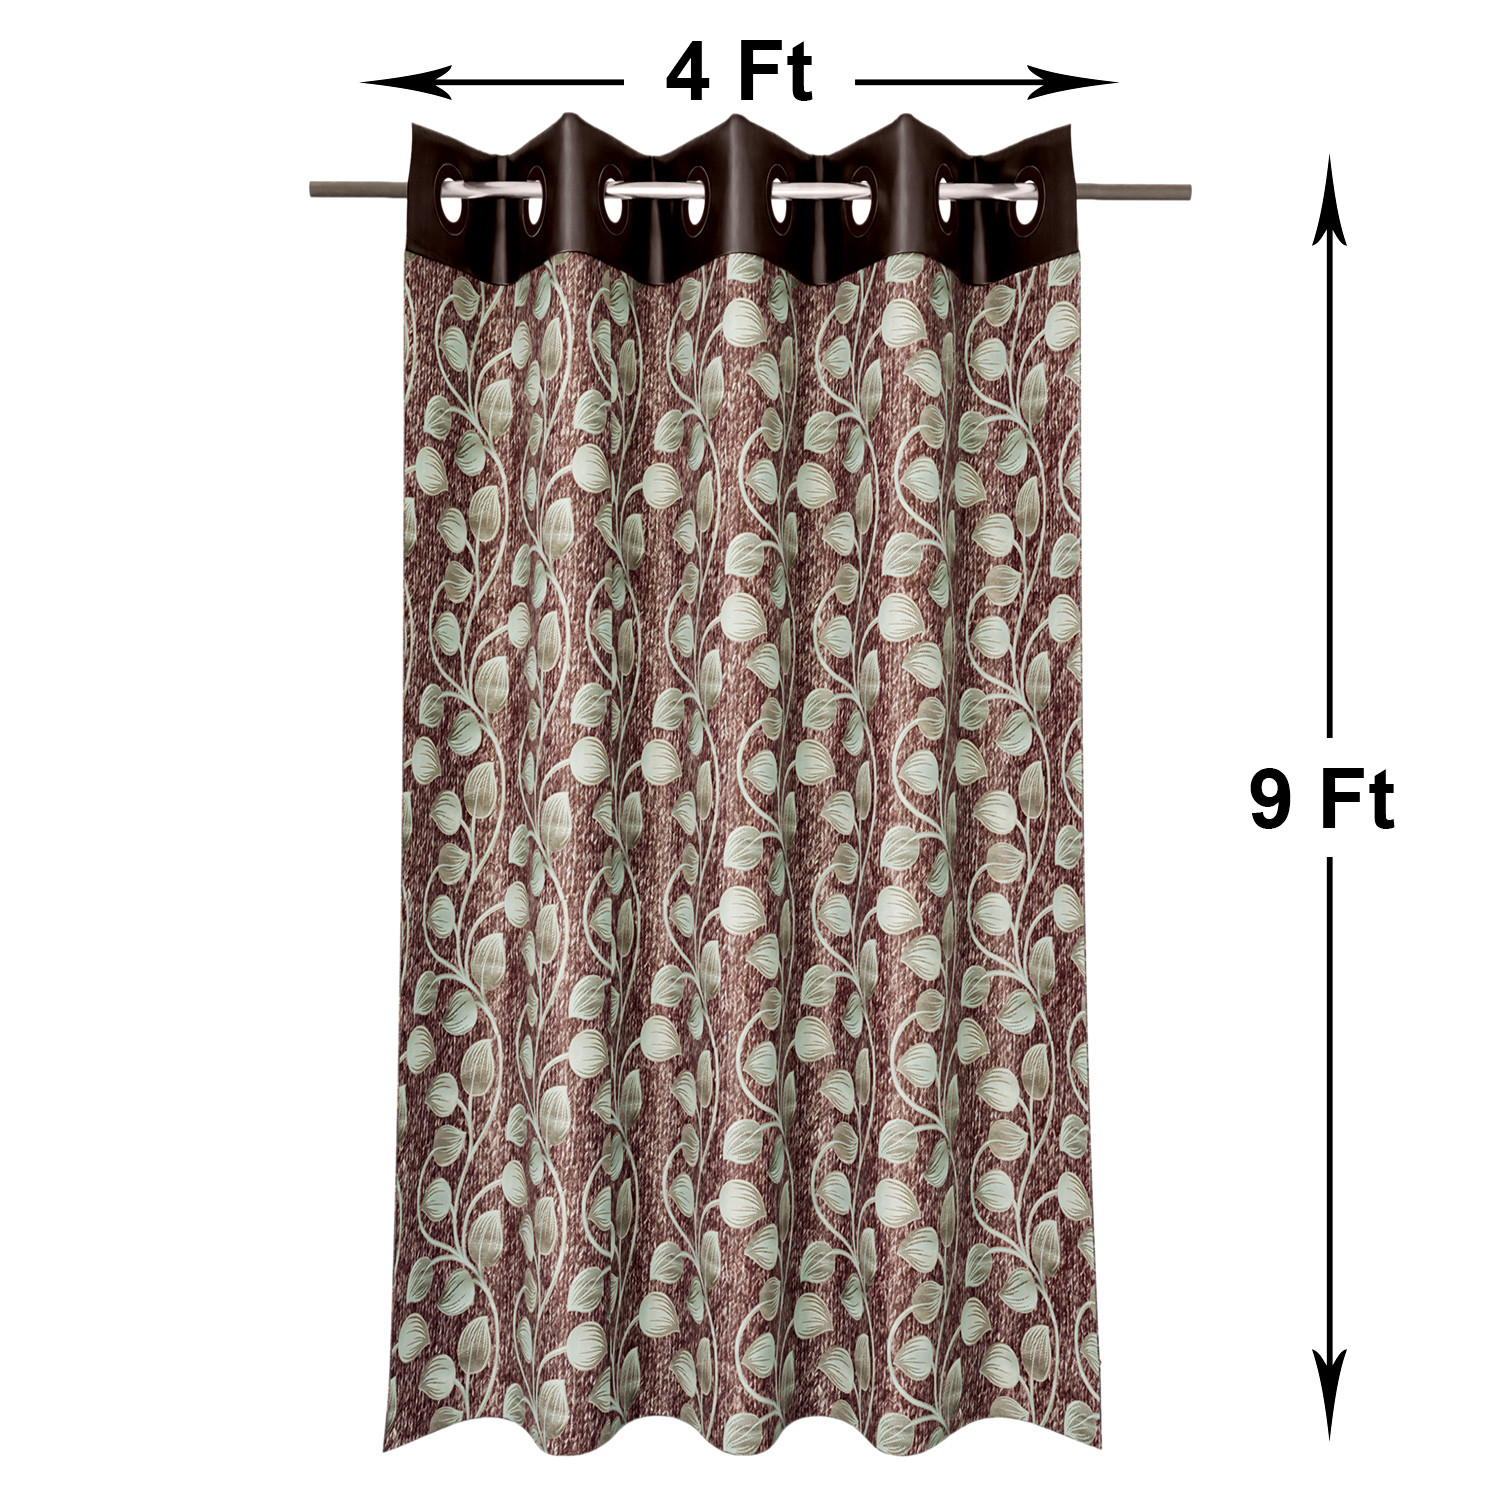 Kuber Industries Silk Decorative 9 Feet Long Door Curtain | Leaf Print Blackout Drapes Curtain With 8 Eyelet For Home & Office (Coffee)